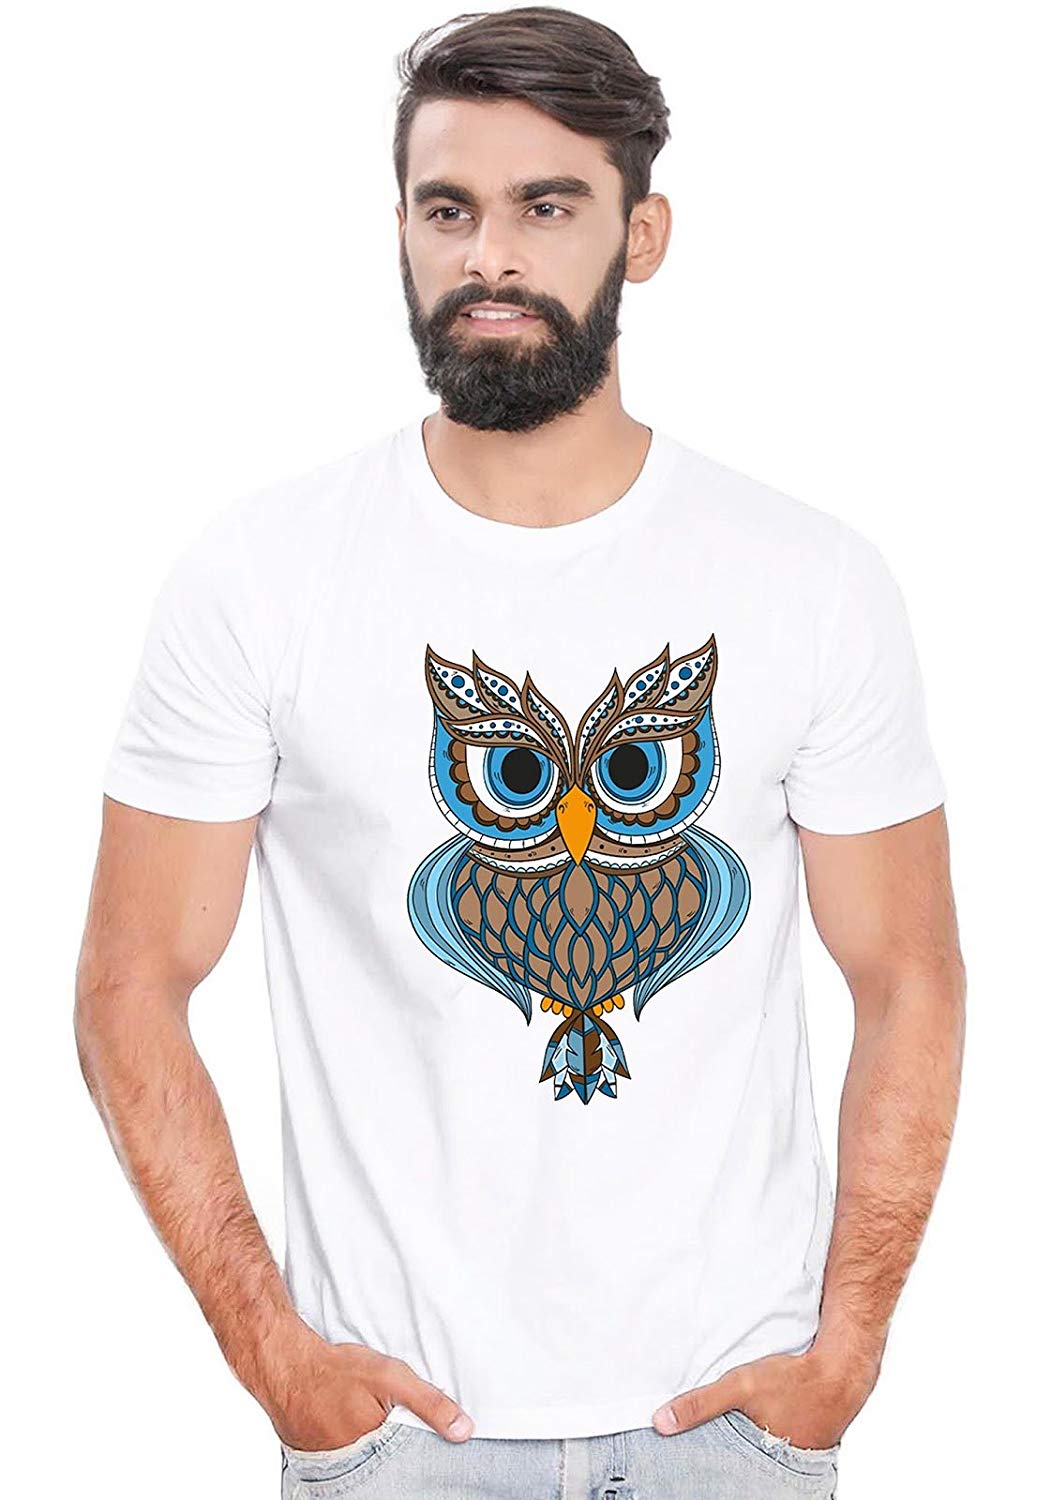 DOUBLE F ROUND NECK HALF SLEEVE WHITE COLOR DESIGNER OWL PRINTED T-SHIRT FOR MEN